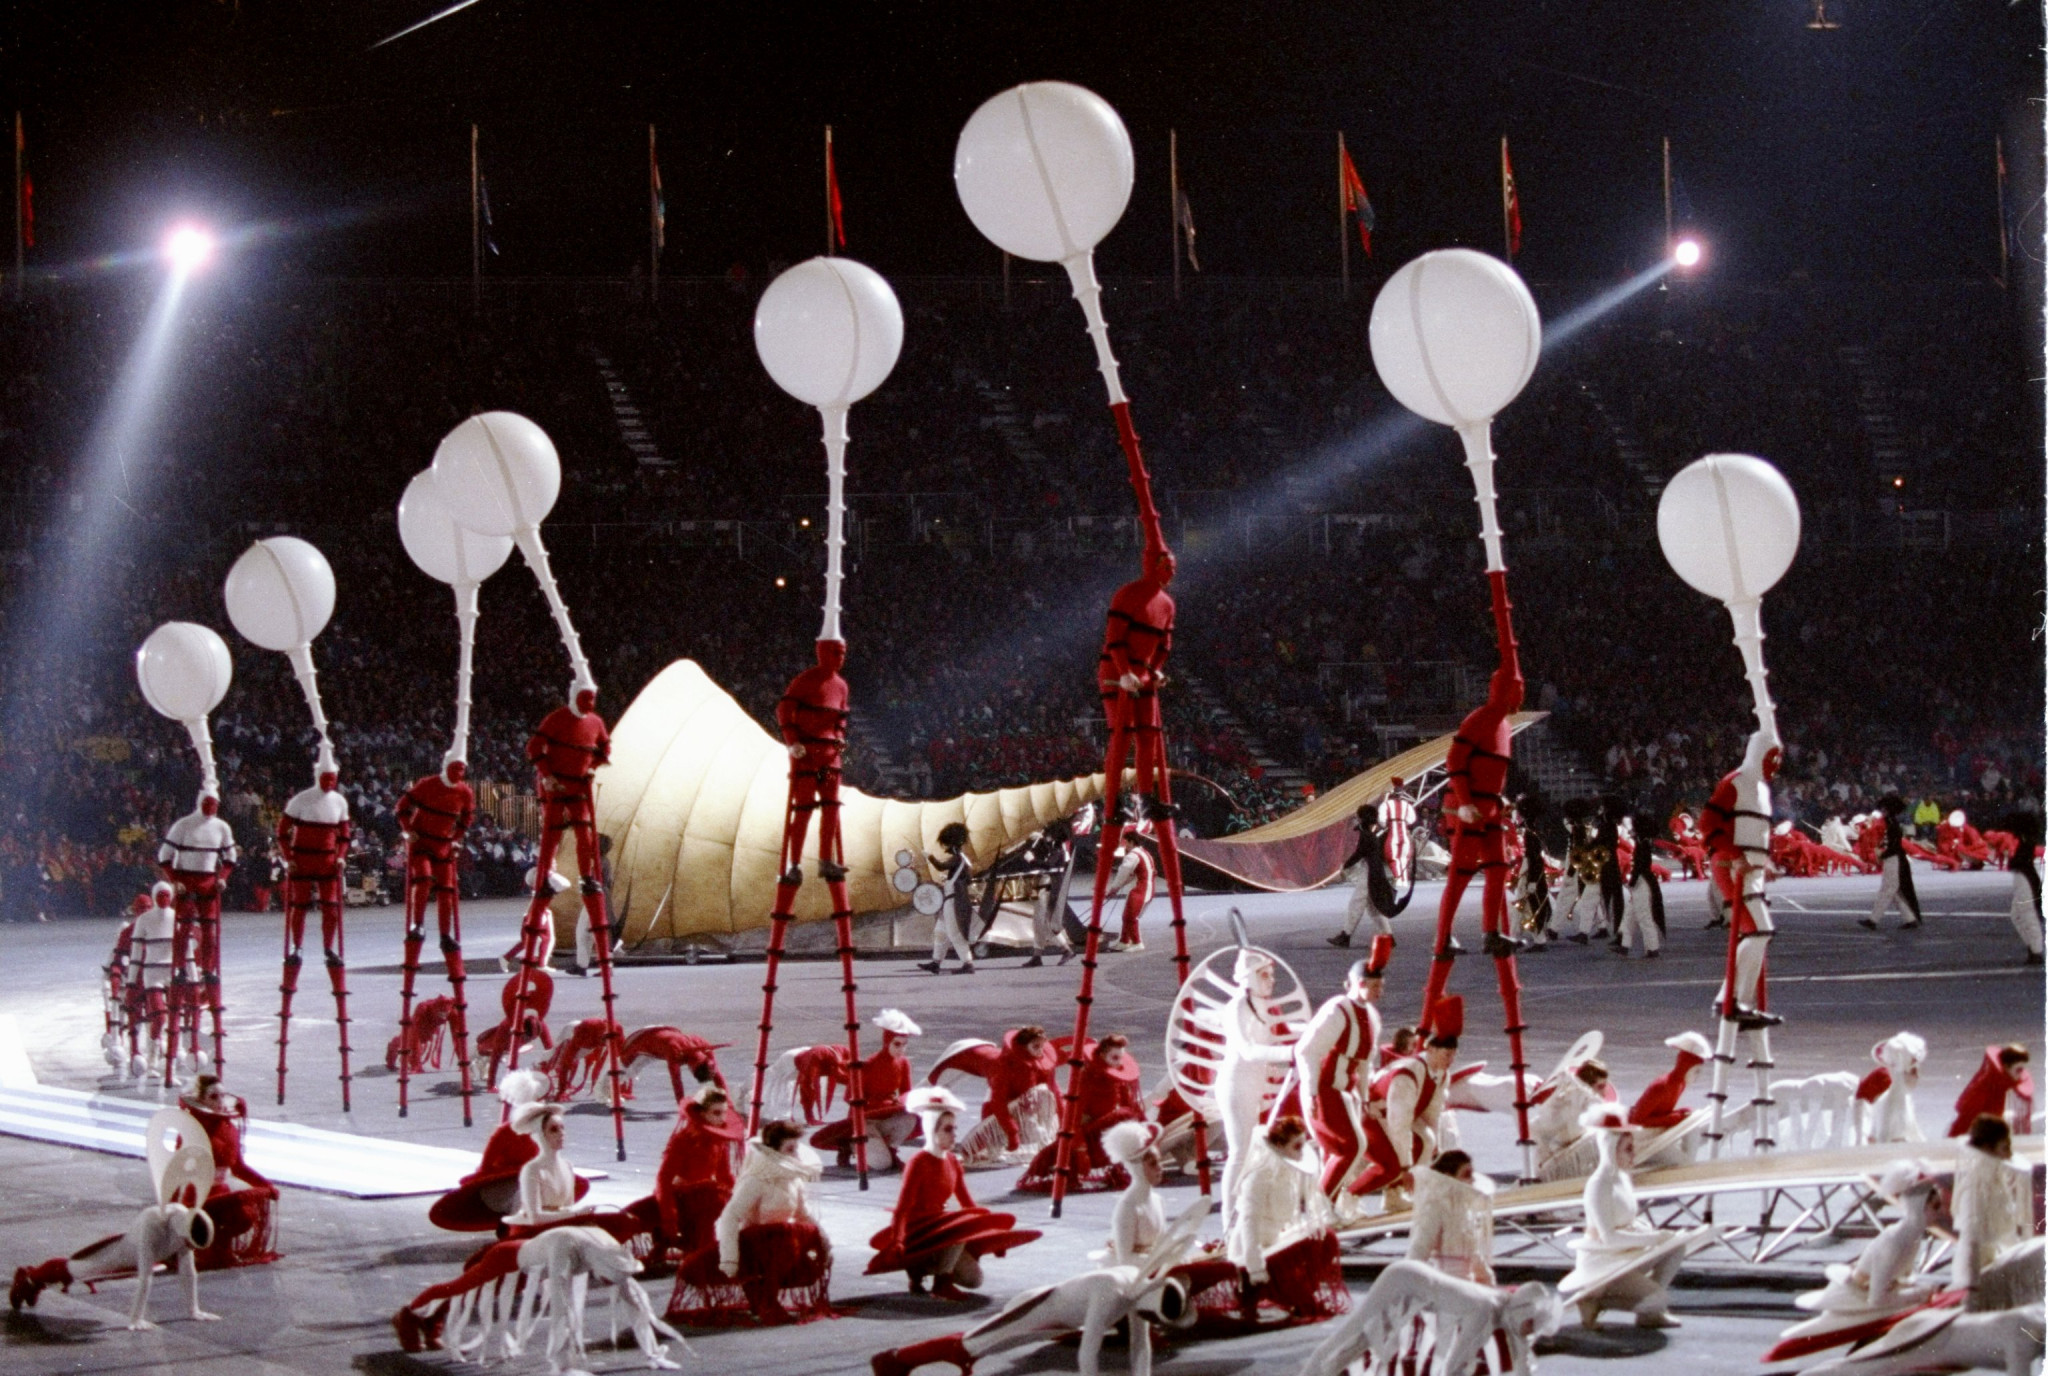 The last Olympic Opening Ceremony on French soil was for the 1992 Winter Games in Albertville ©Getty Images